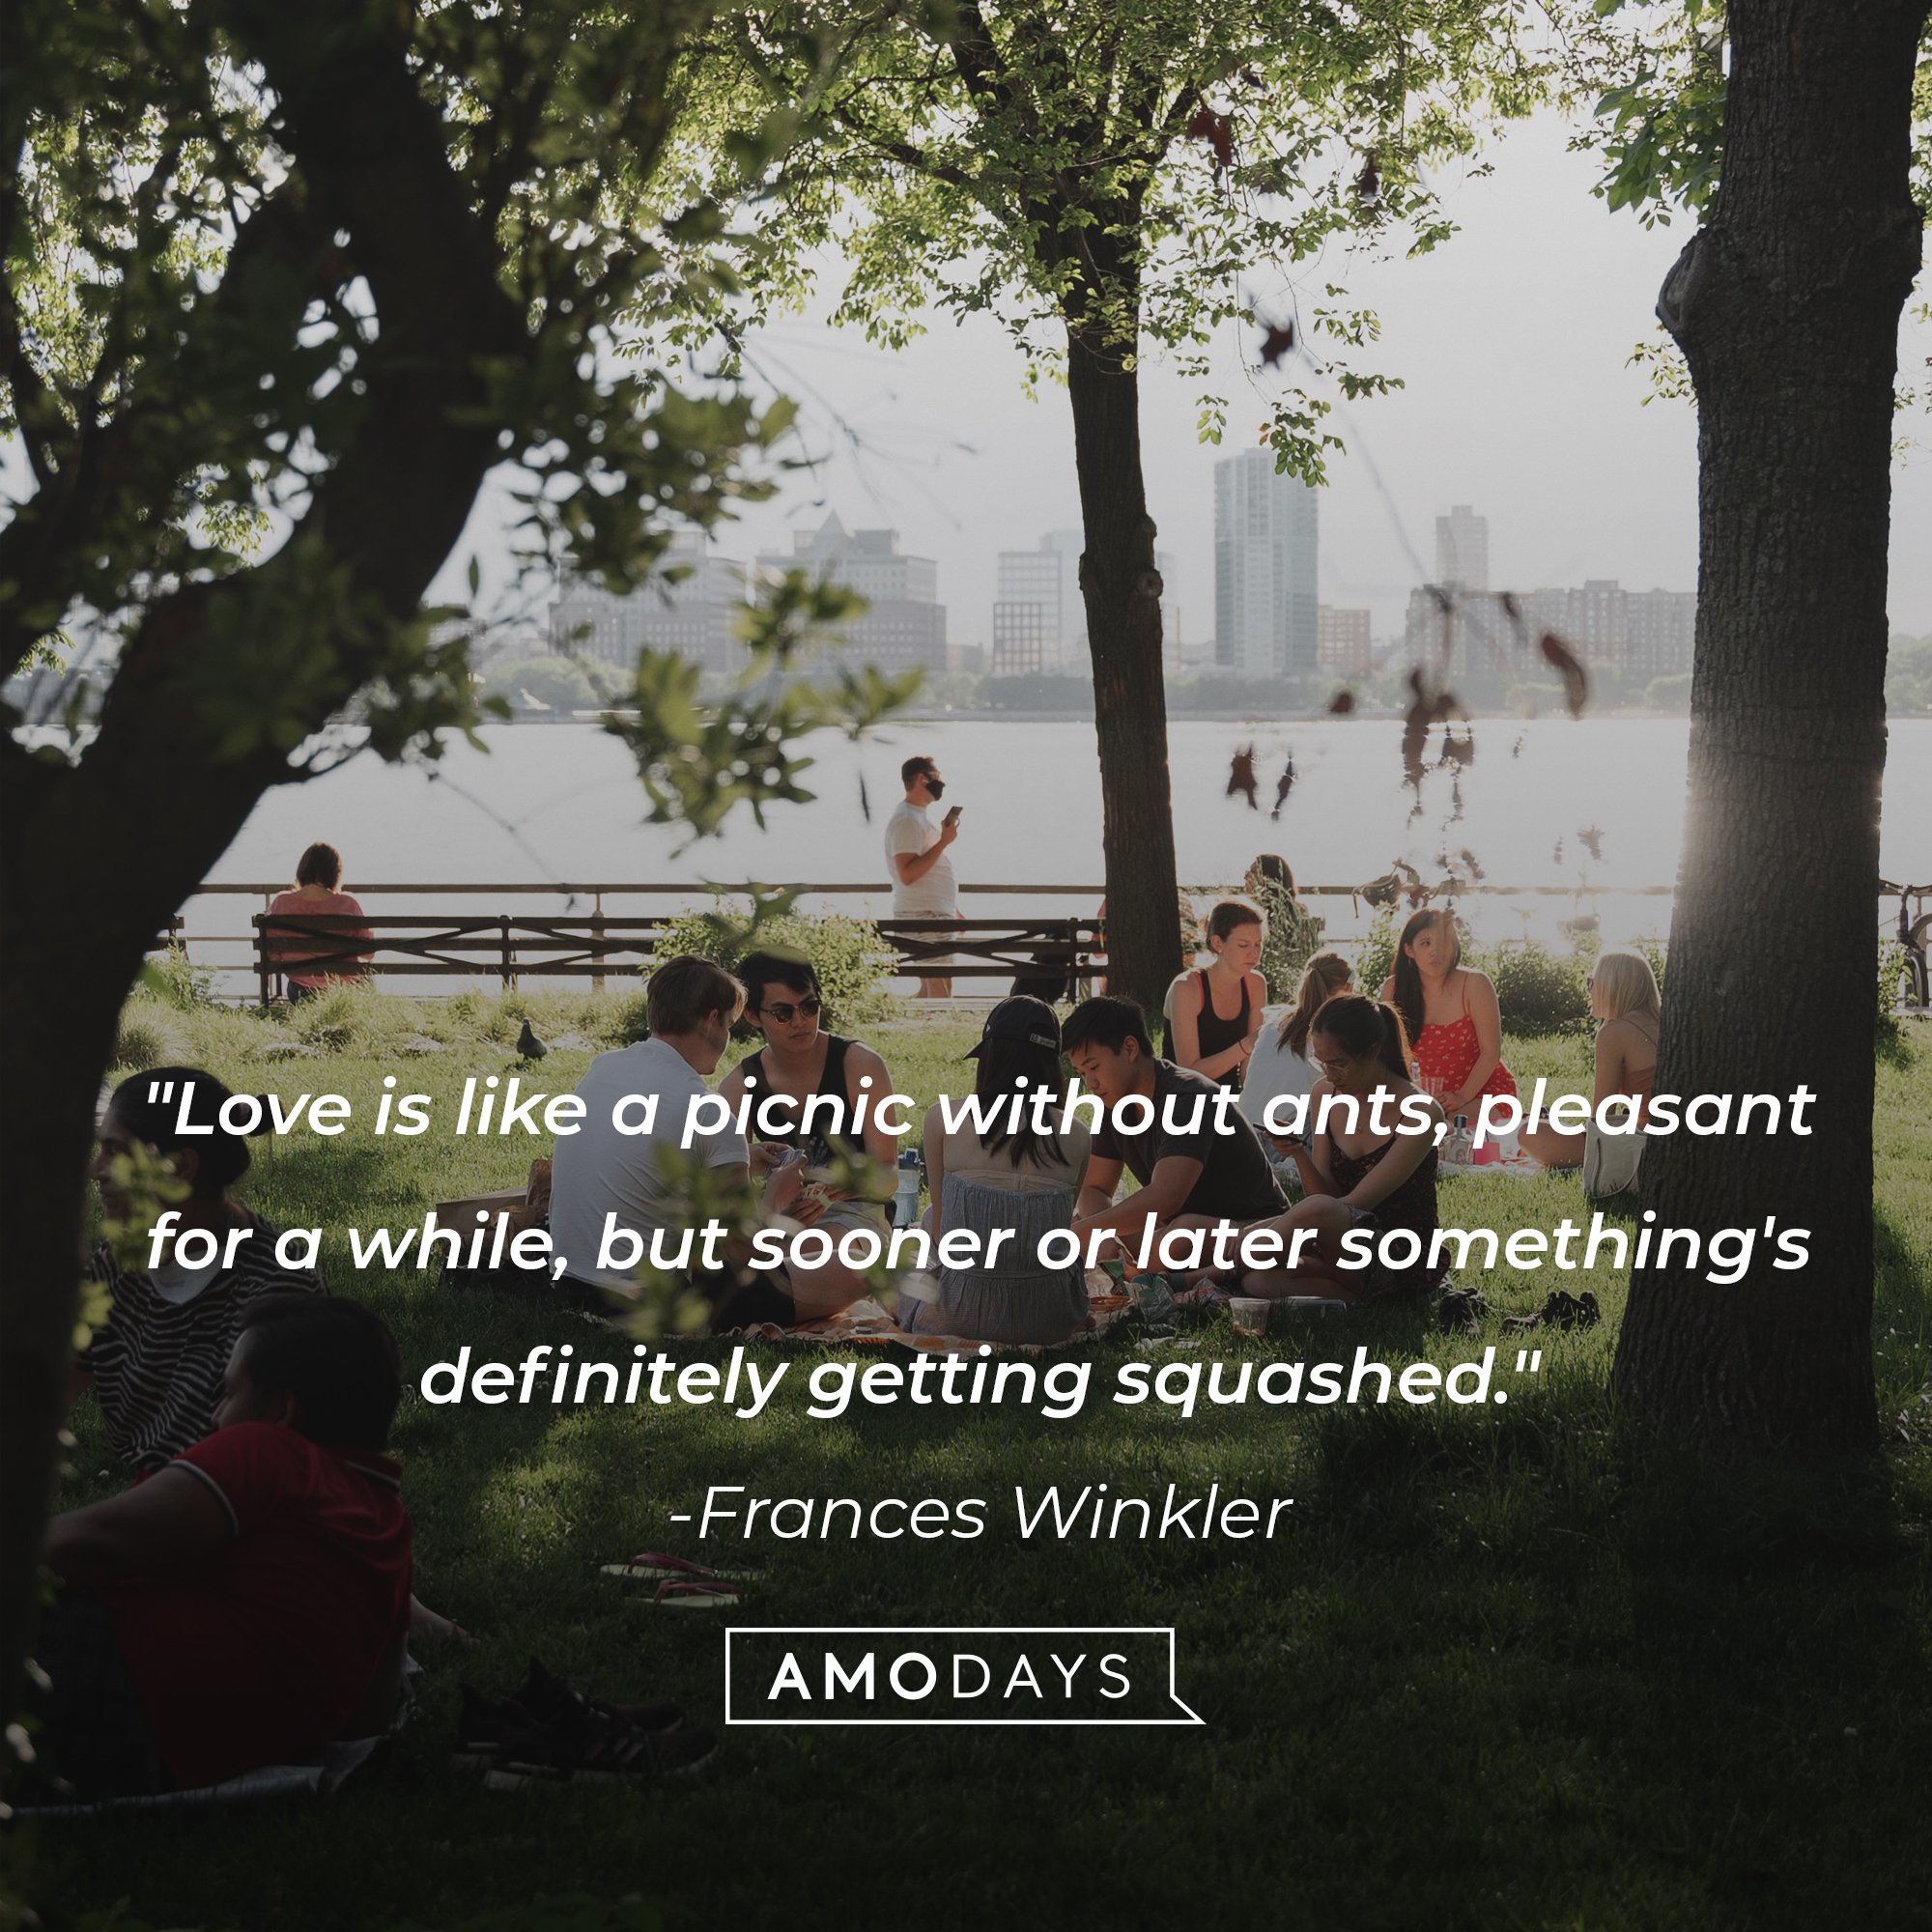 Frances Winkler's quote: "Love is like a picnic without ants, pleasant for a while, but sooner or later something's definitely getting squashed." | Image: AmoDays